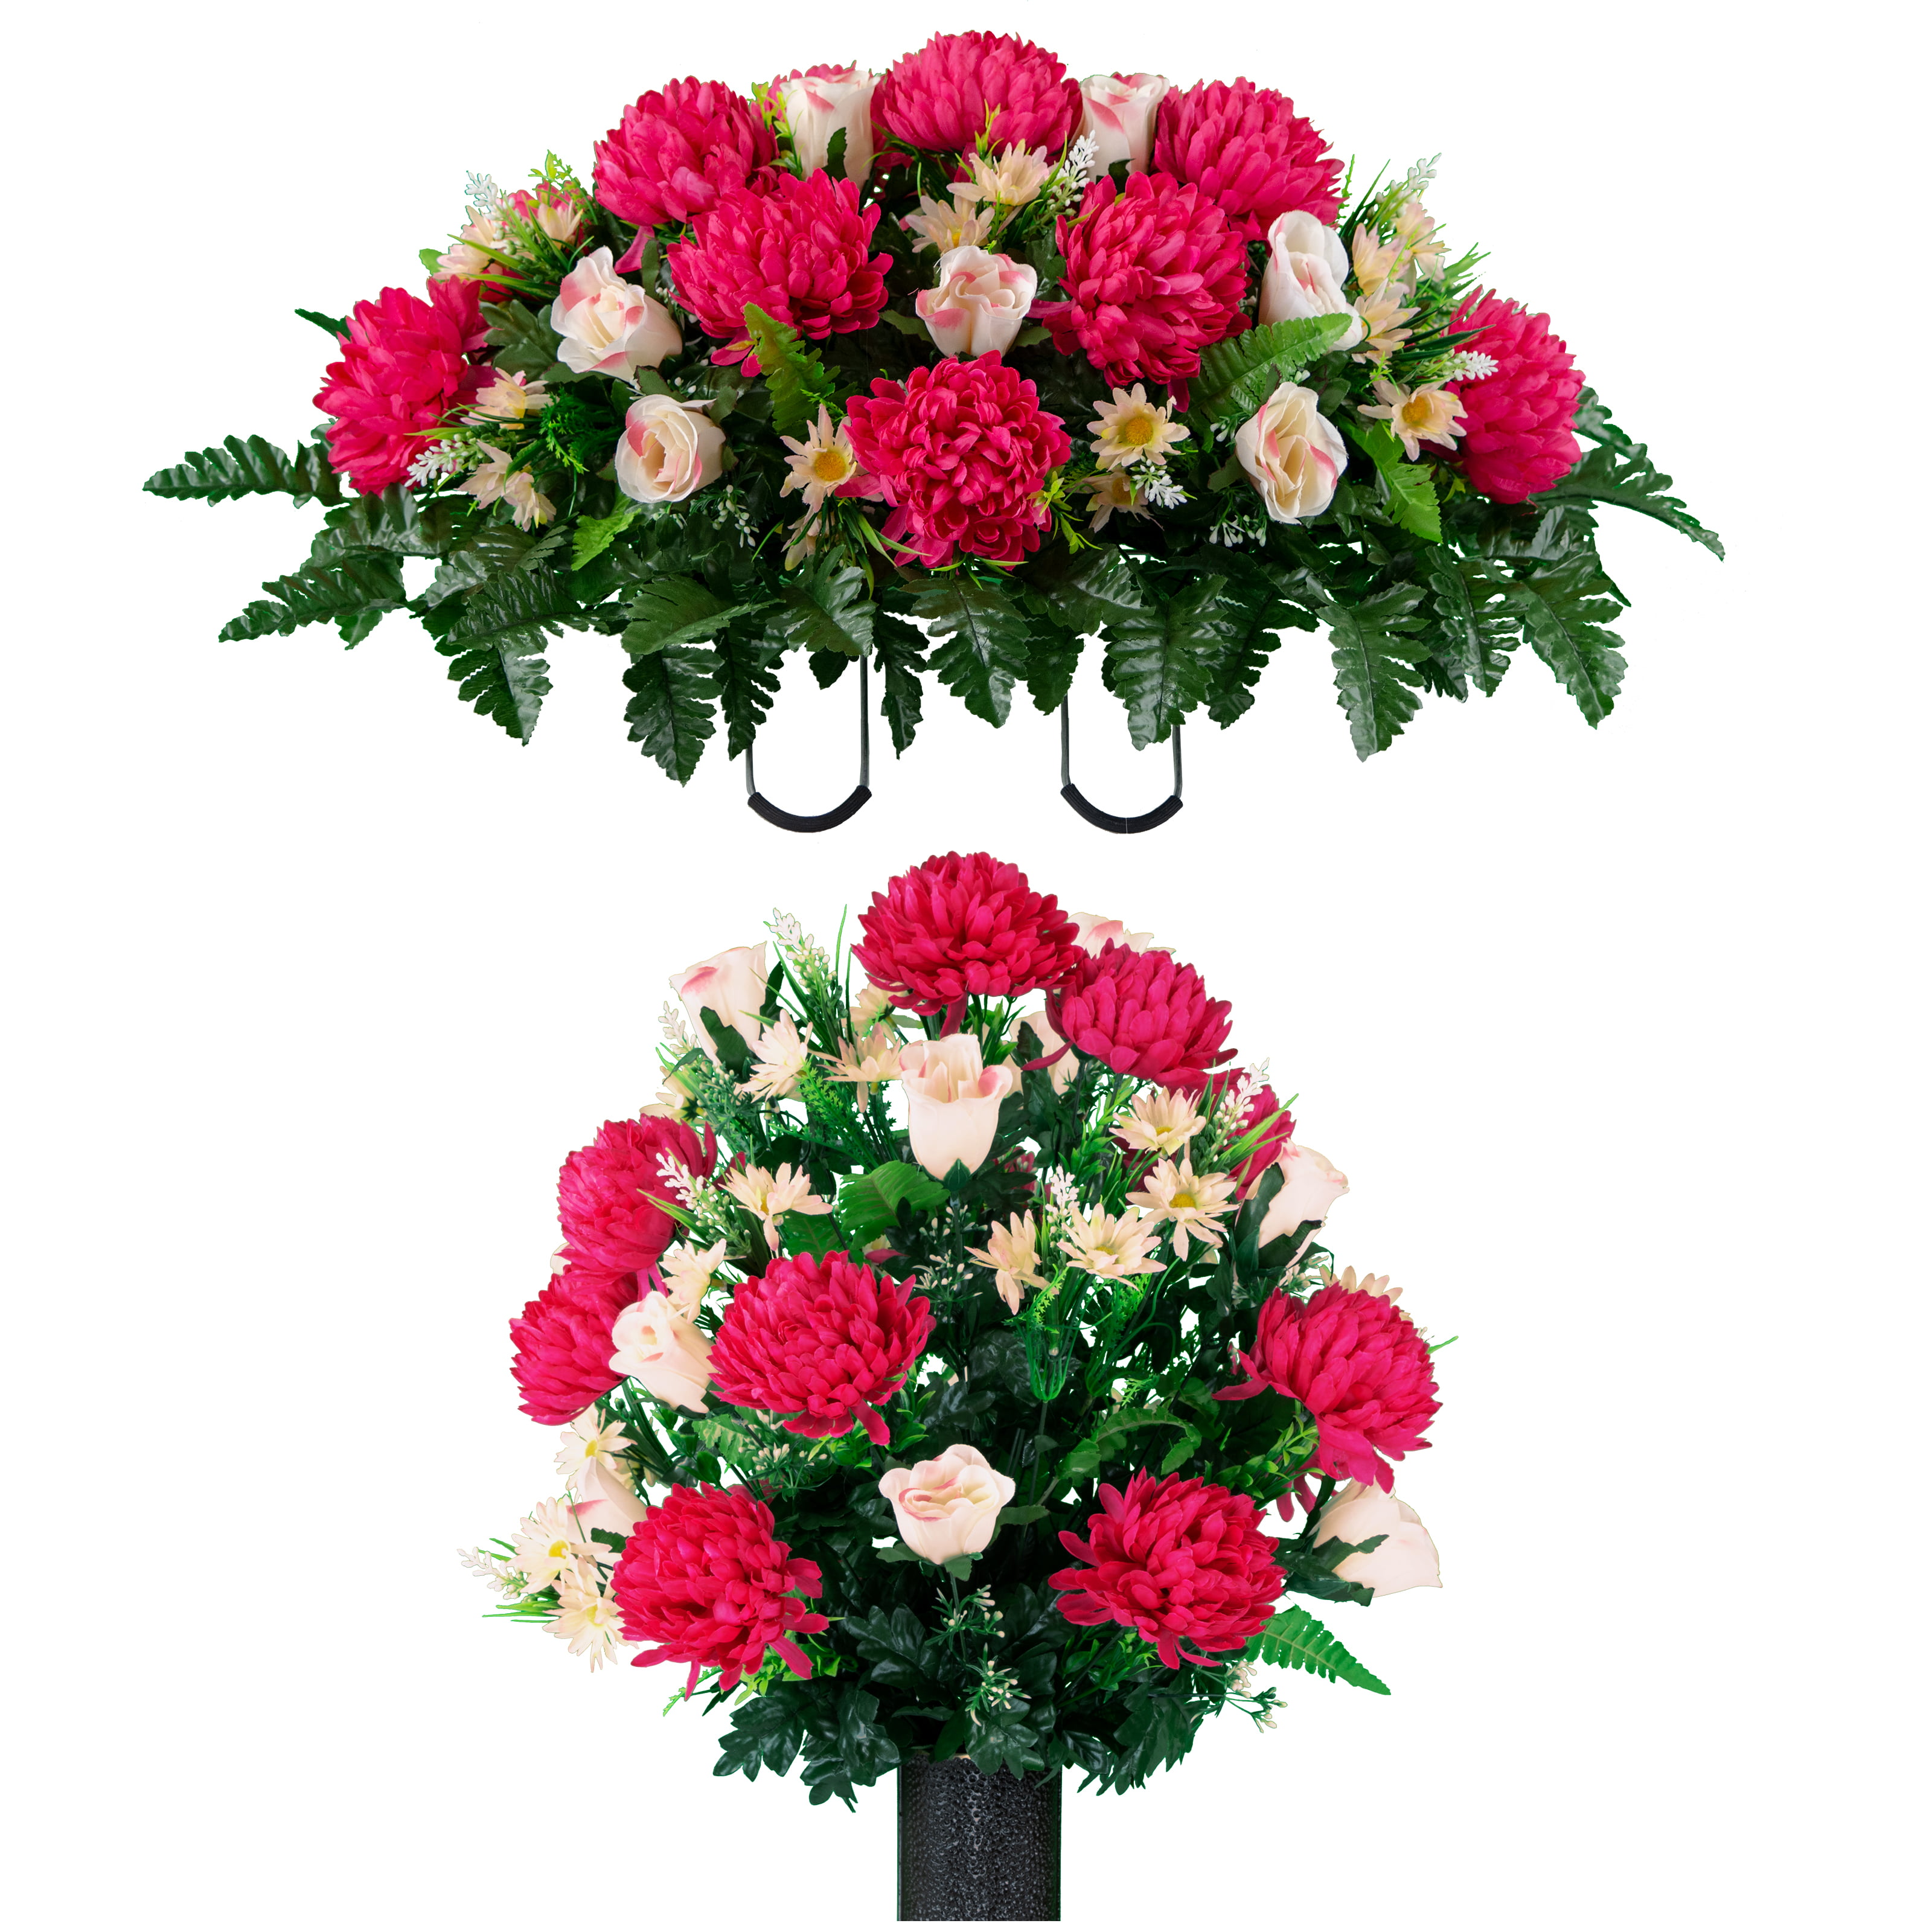 MUM Funeral Flowers Grave Cemetary Floral Tribute Based Oasis Artificial 